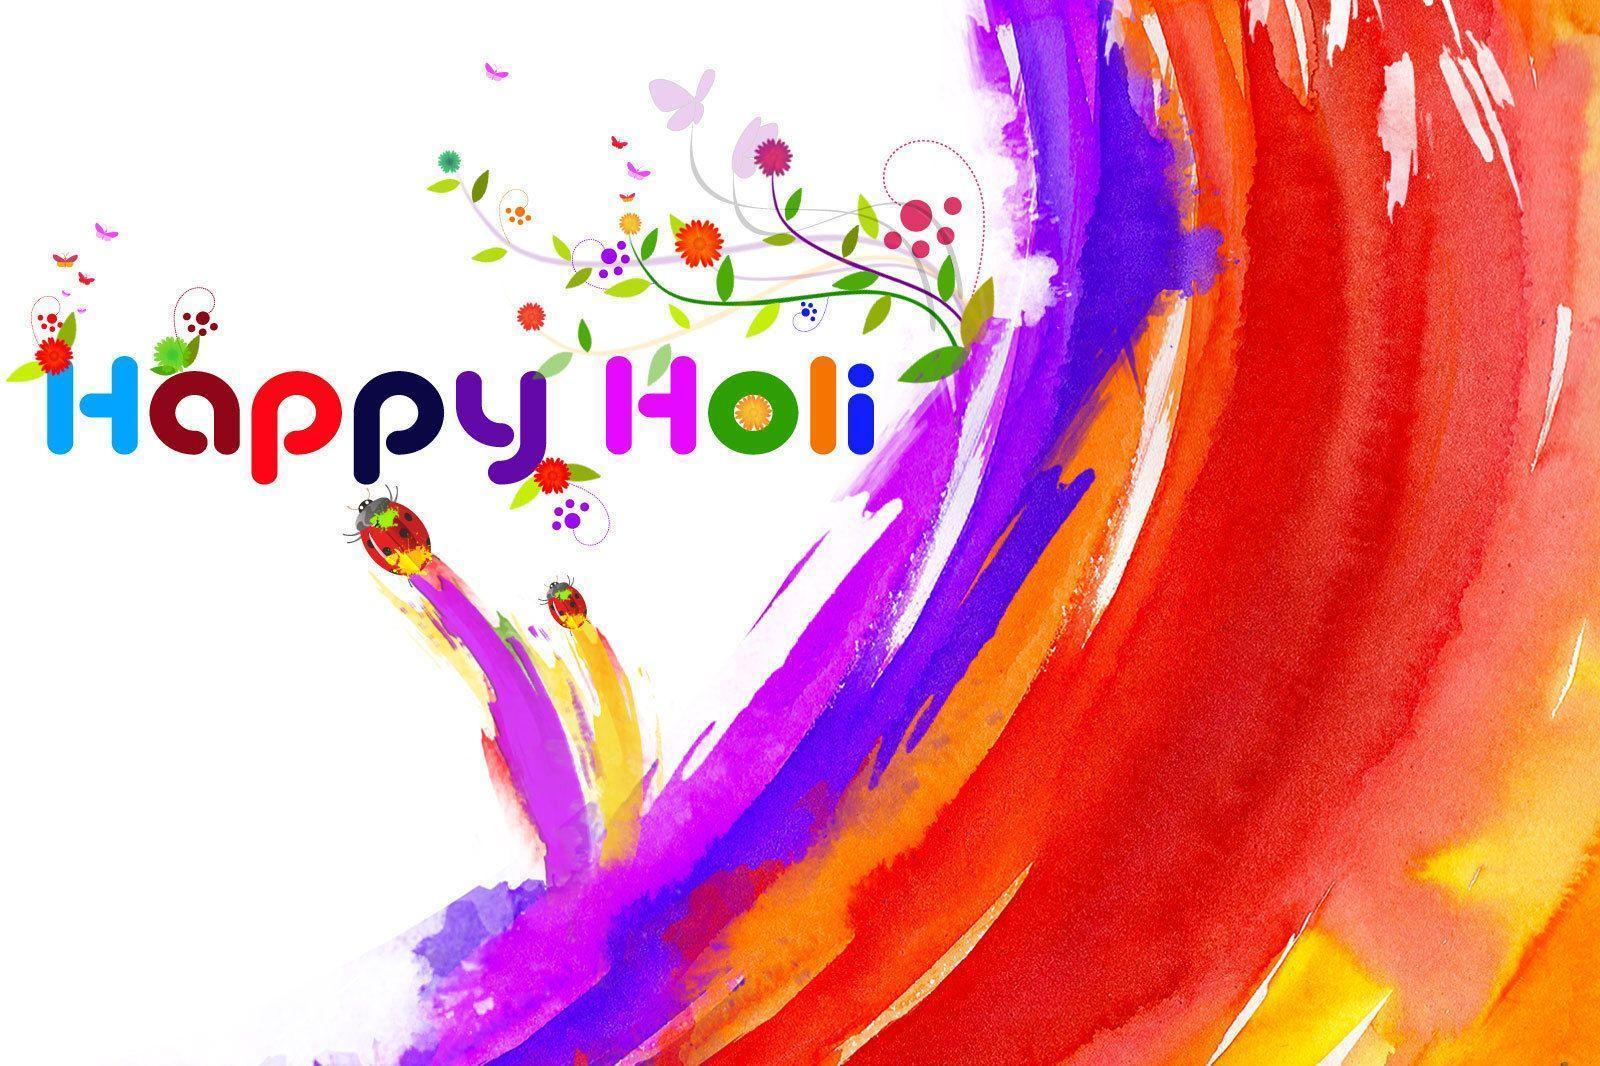 Happy Holi Photo Image Picture & Wallpaper For Everyone